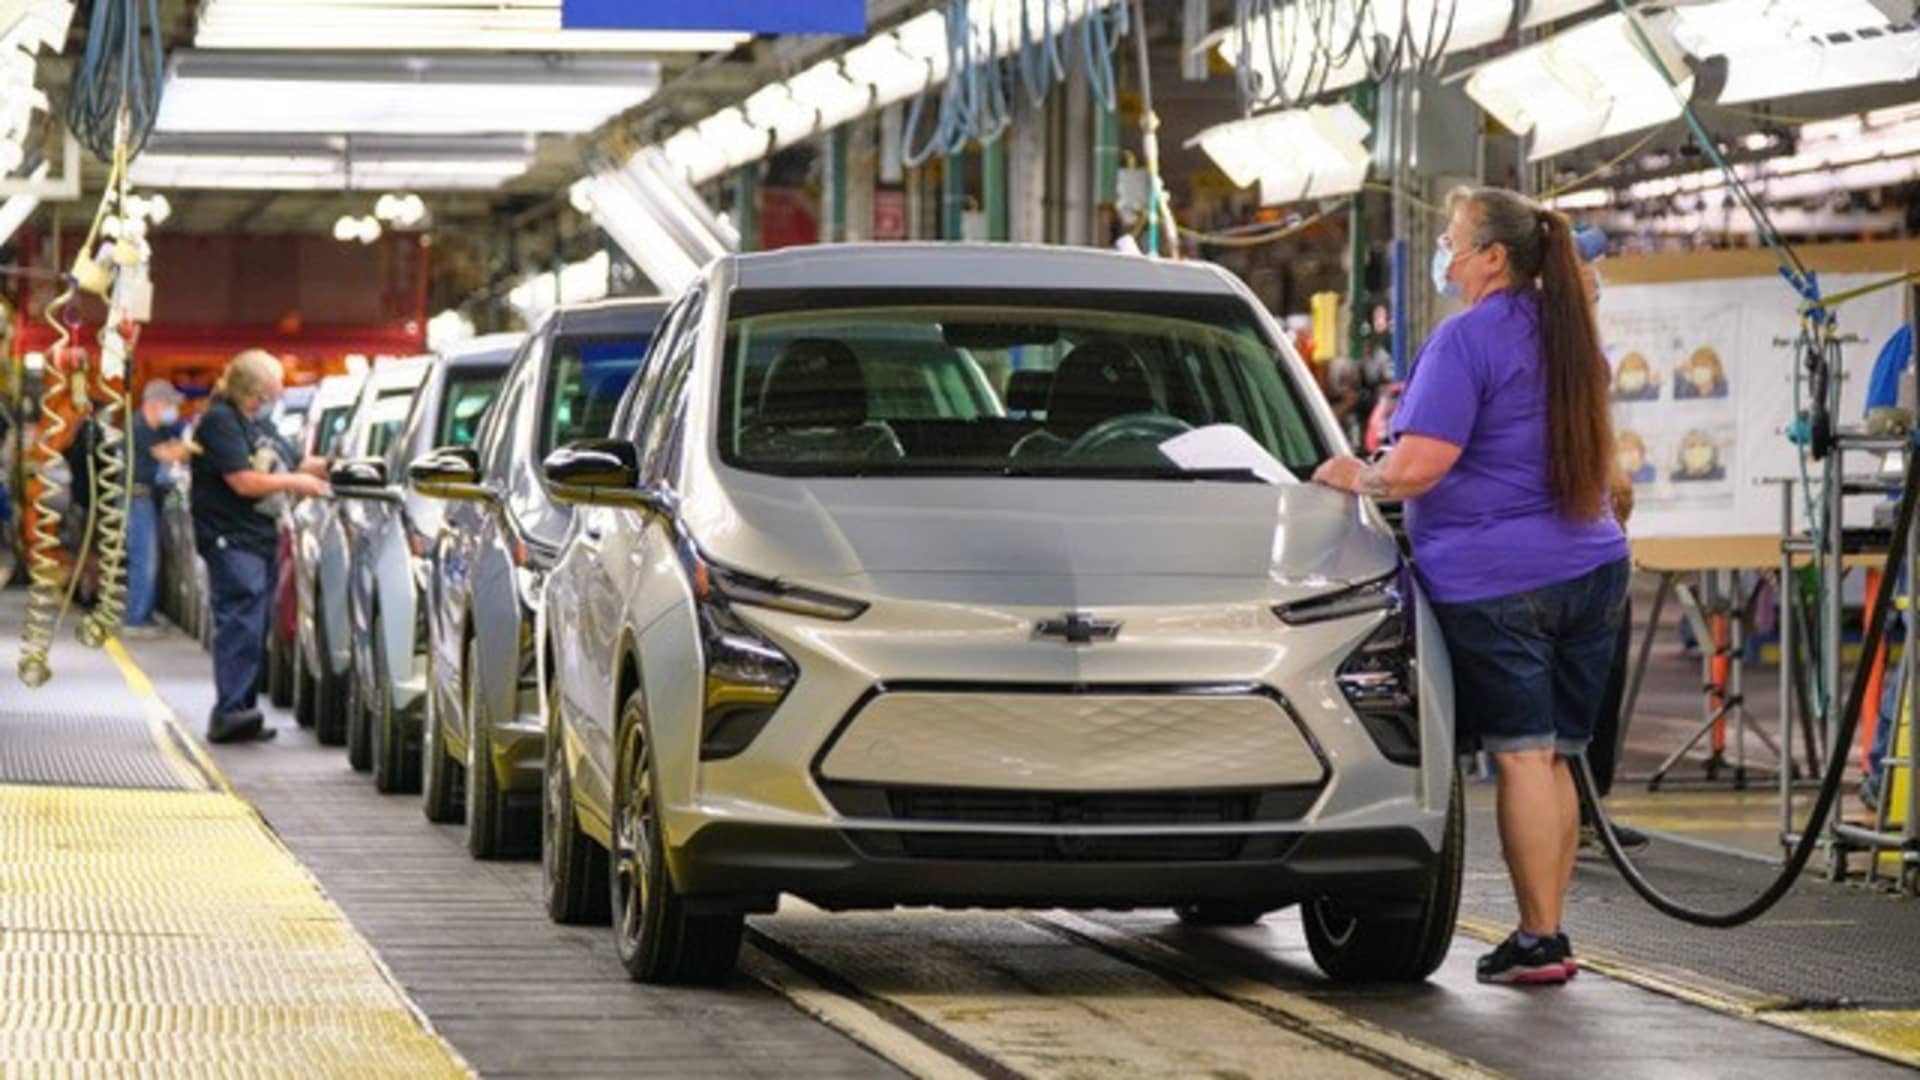 GM to lay off 1,300 Michigan workers as vehicles end production